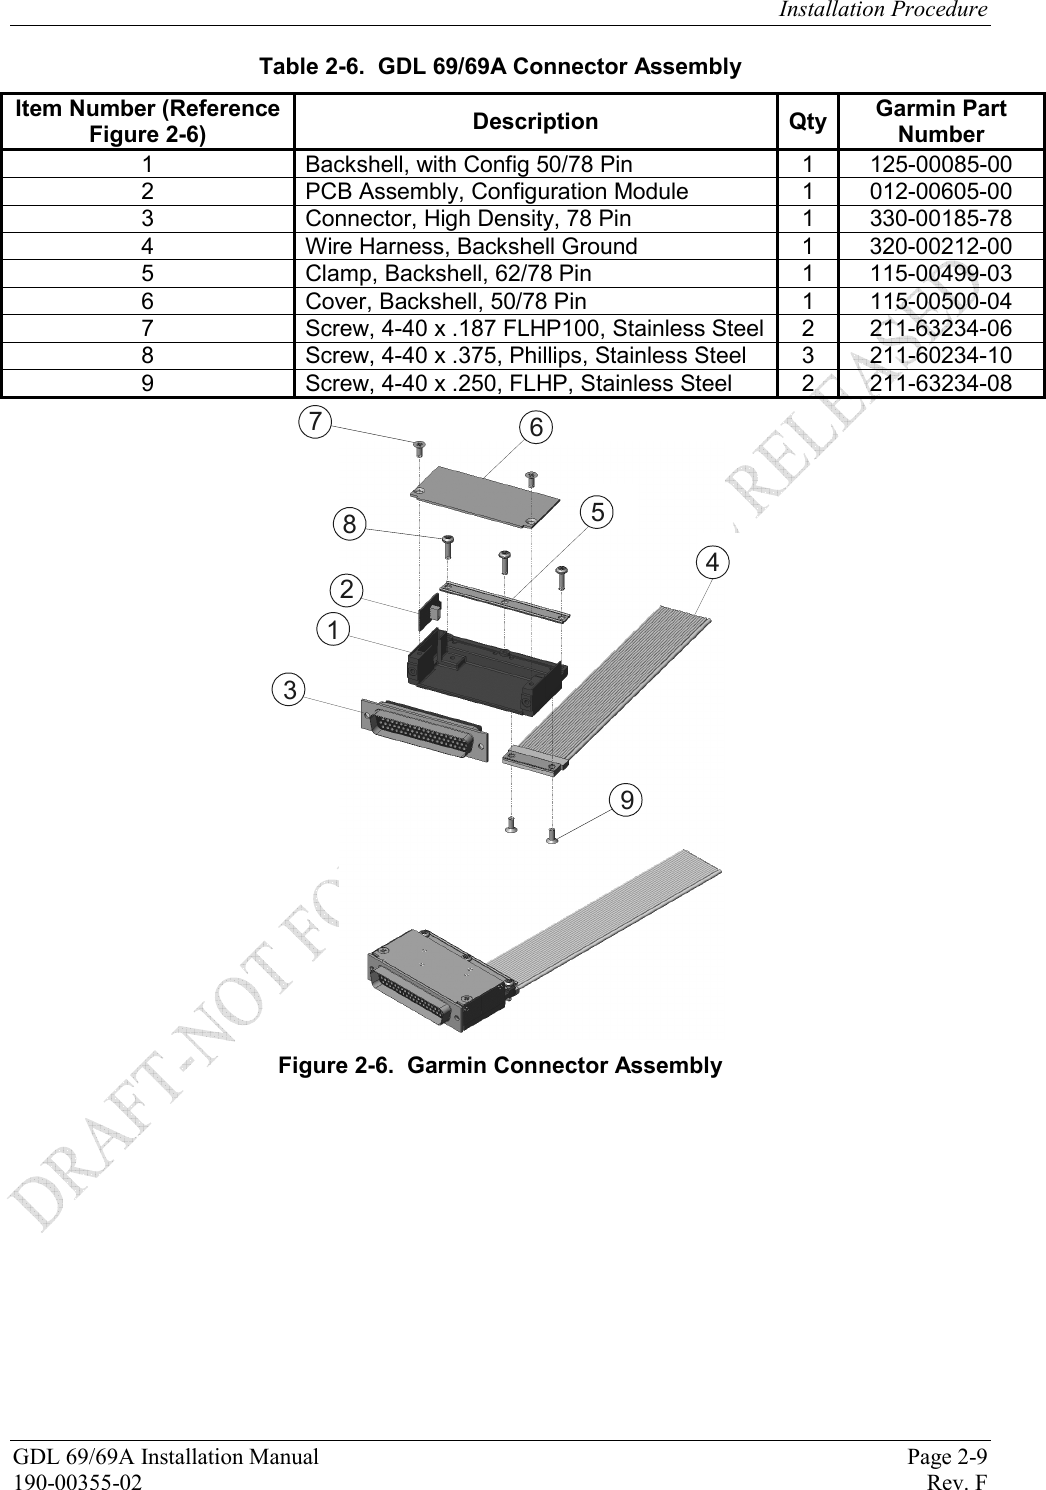 Installation Procedure GDL 69/69A Installation Manual  Page 2-9 190-00355-02   Rev. F Table 2-6.  GDL 69/69A Connector Assembly Item Number (Reference Figure 2-6)  Description Qty Garmin Part Number 1  Backshell, with Config 50/78 Pin  1  125-00085-00 2  PCB Assembly, Configuration Module  1  012-00605-00 3  Connector, High Density, 78 Pin  1  330-00185-78 4  Wire Harness, Backshell Ground  1  320-00212-00 5  Clamp, Backshell, 62/78 Pin  1  115-00499-03 6  Cover, Backshell, 50/78 Pin  1  115-00500-04 7  Screw, 4-40 x .187 FLHP100, Stainless Steel  2  211-63234-06 8  Screw, 4-40 x .375, Phillips, Stainless Steel  3  211-60234-10 9  Screw, 4-40 x .250, FLHP, Stainless Steel  2  211-63234-08 765482139 Figure 2-6.  Garmin Connector Assembly 